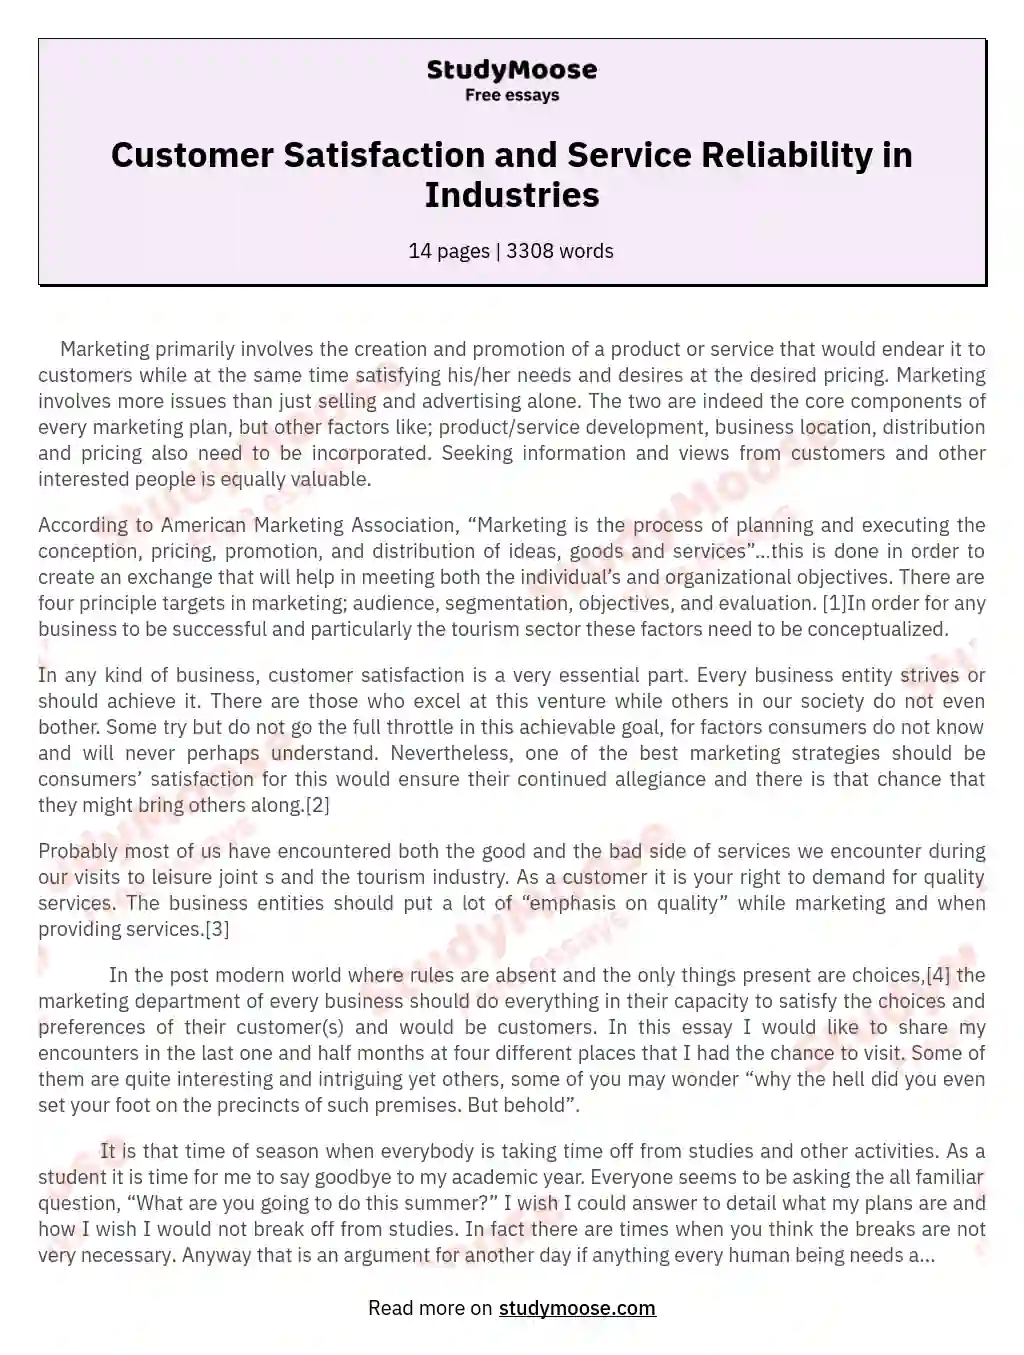 Customer Satisfaction and Service Reliability in Industries essay